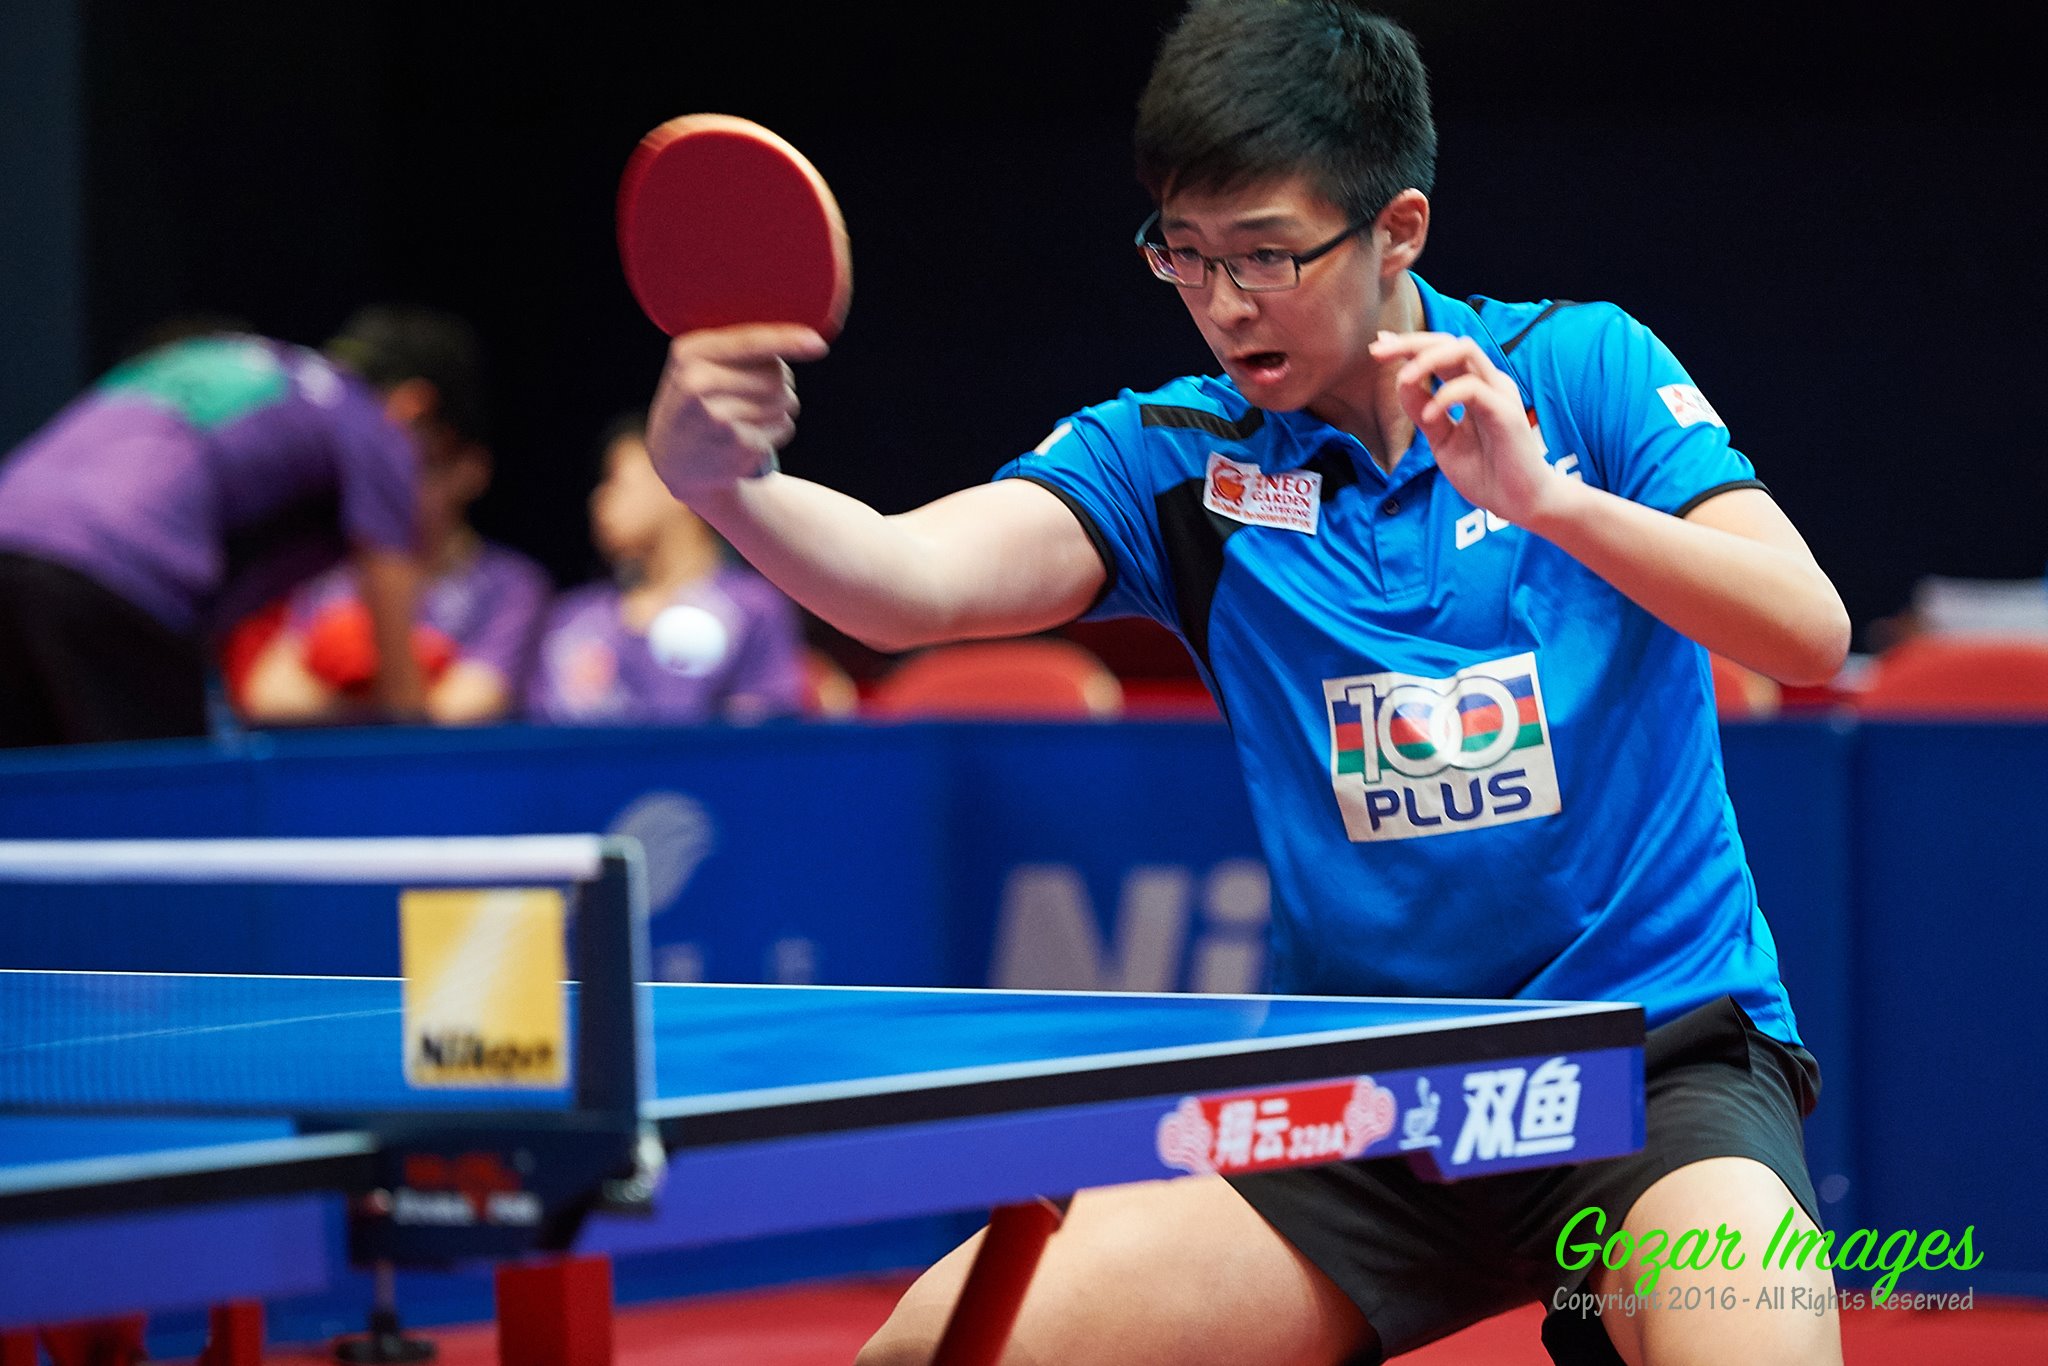 Singapore Juniors secured Silver in the Boys’ Doubles Event at the 2016 Hong Kong Junior & Cadet Open- ITTF Golden Series Junior Circuit